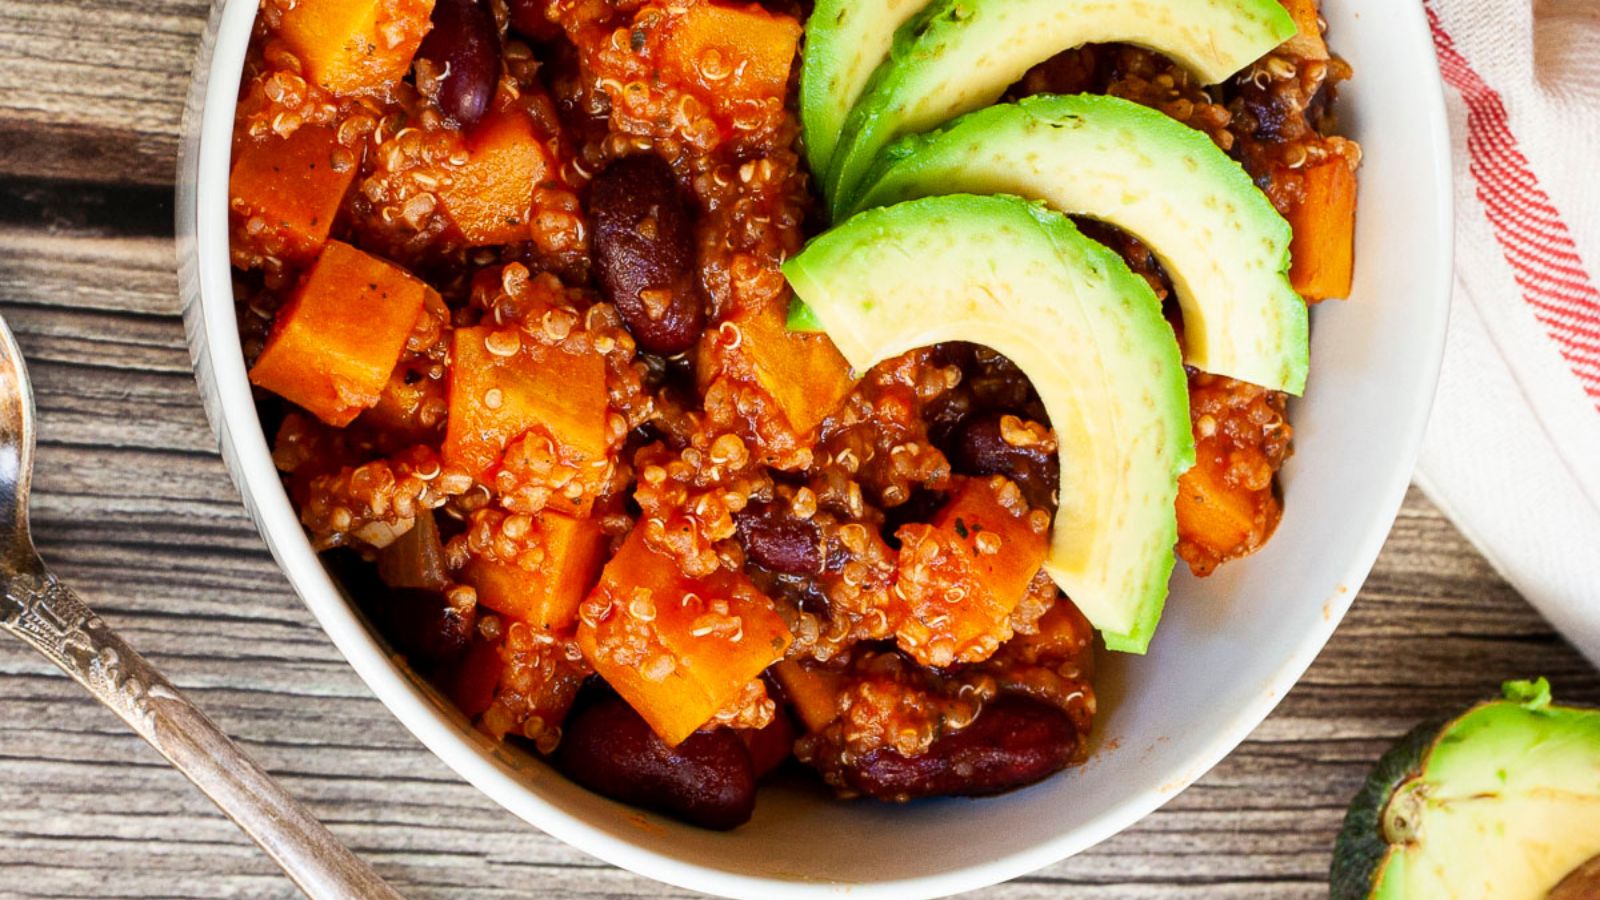 <p>This quinoa sweet potato chili is a perfect meatless and hearty meal that can be made in under 30 minutes. With a combination of quinoa, sweet potatoes, beans, and spices, this chili is flavorful, filling, and nutritious.</p><p><strong>Recipe: <a href="https://mypureplants.com/quinoa-sweet-potato-chili/">quinoa sweet potato chili</a></strong></p>